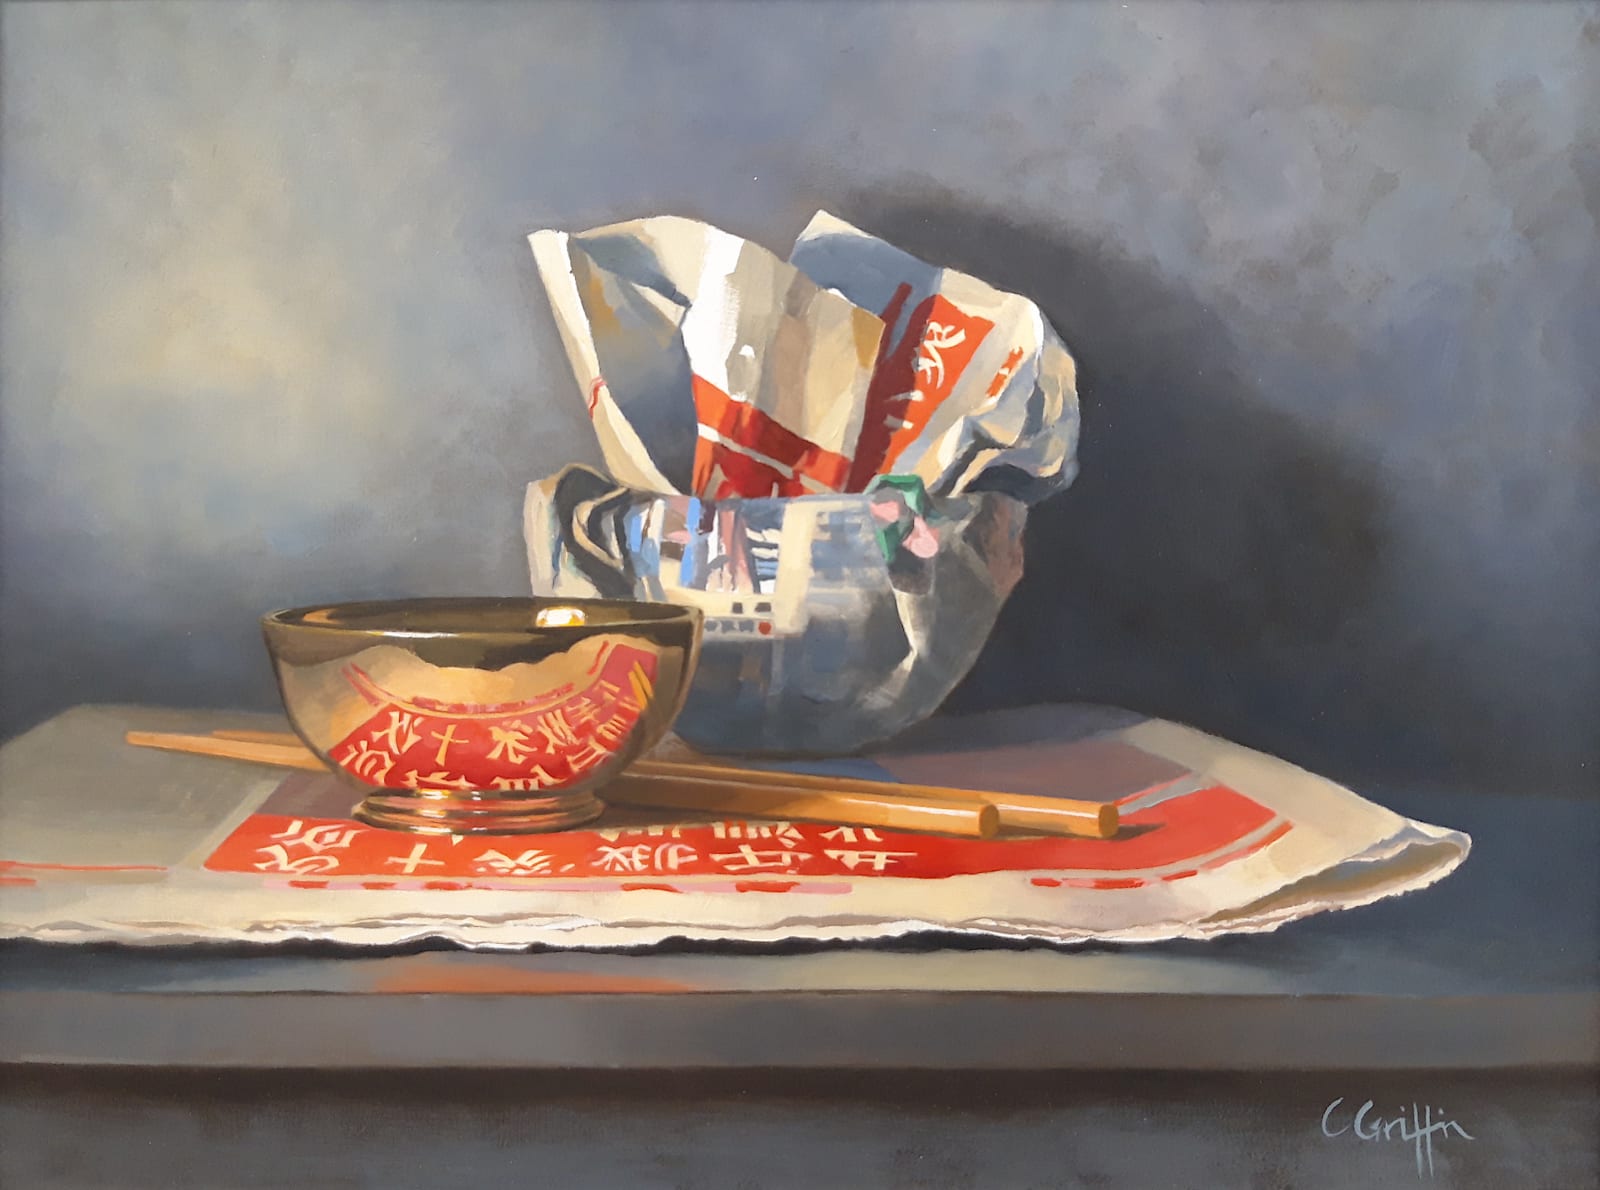 CAROLE GRIFFIN, CHINESE TAKEAWAY